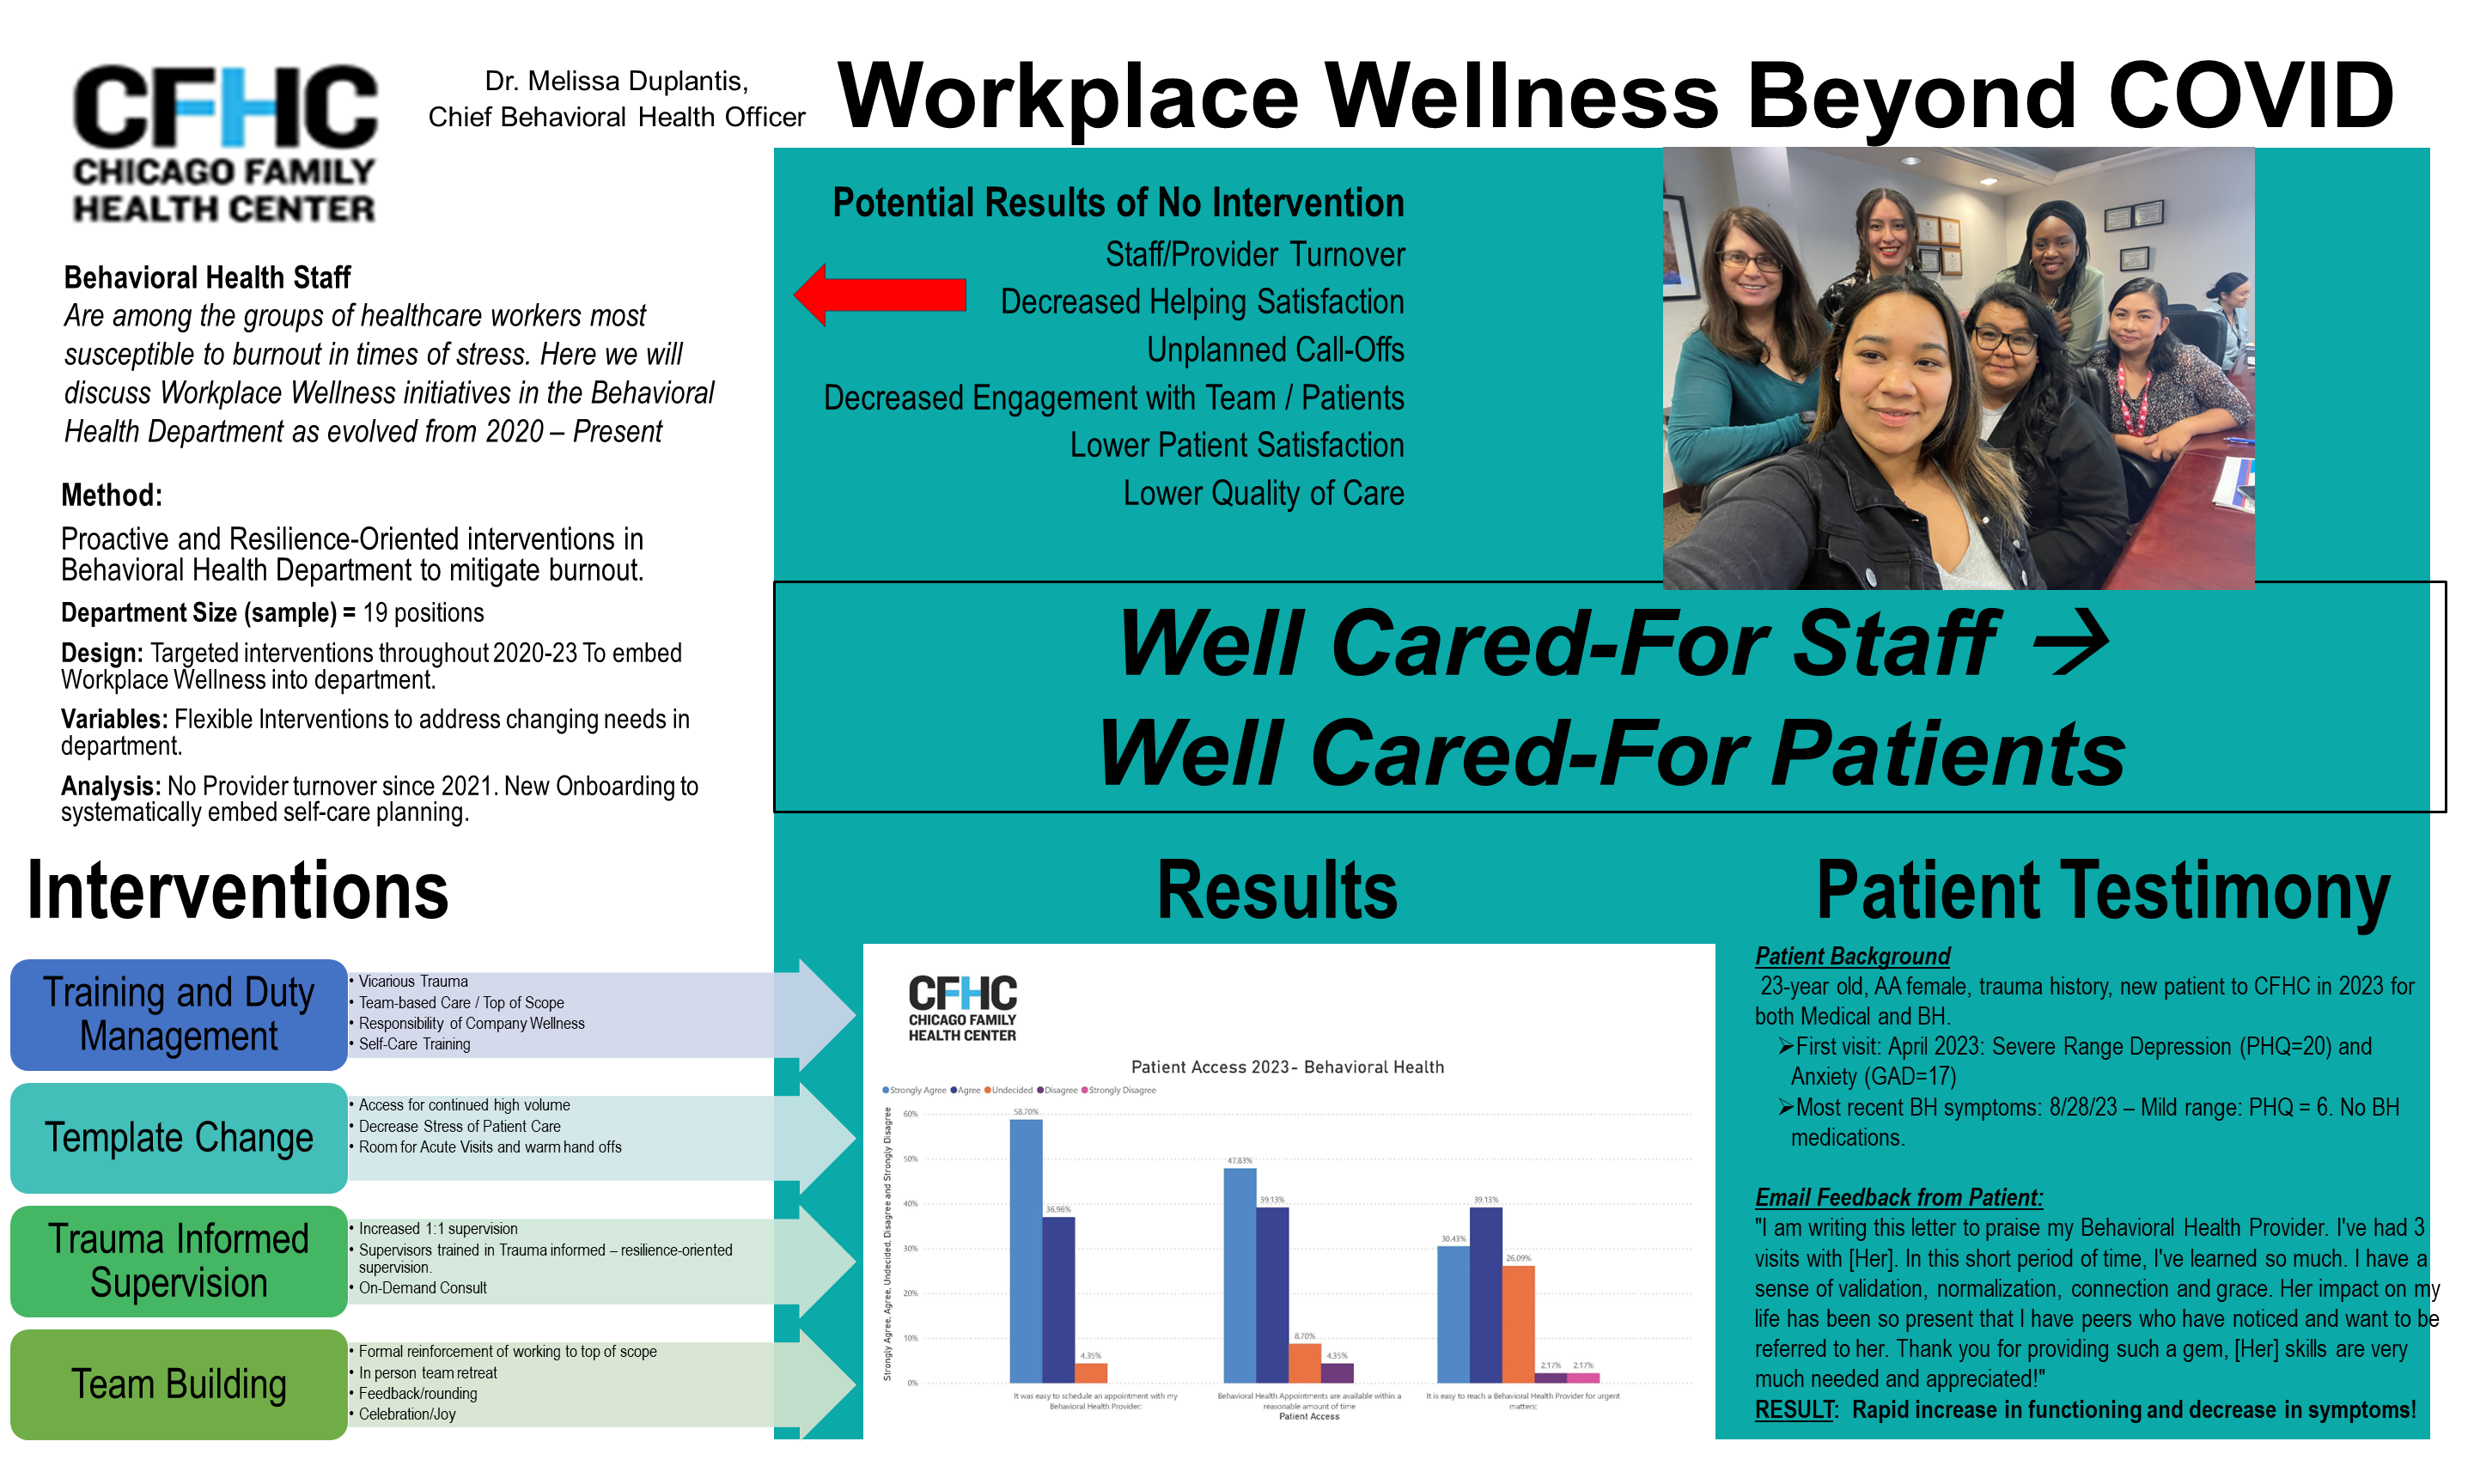 Chicago Family Health Center - Workplace Wellness Beyond COVID